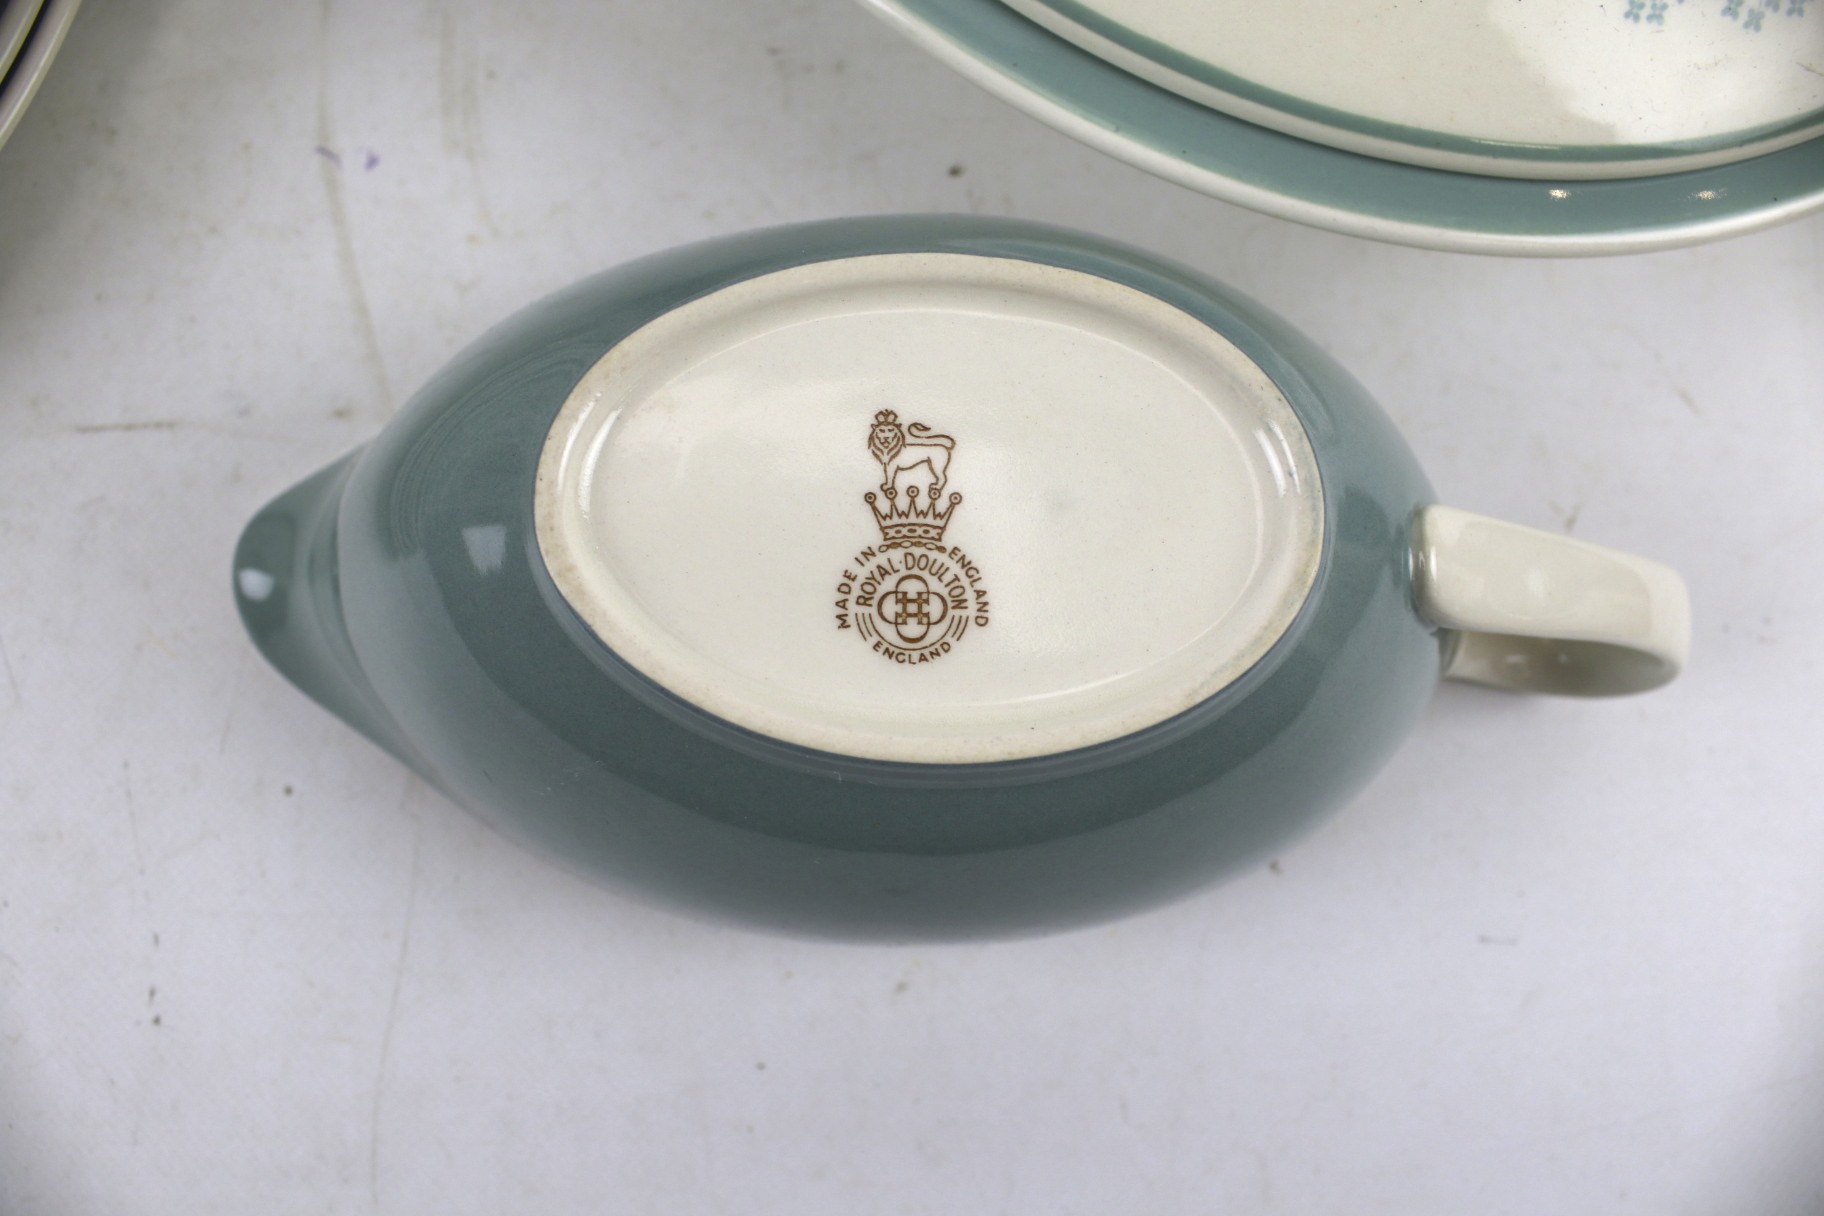 A Royal Doulton dinner service in the 'Queenslace' pattern. - Image 2 of 2